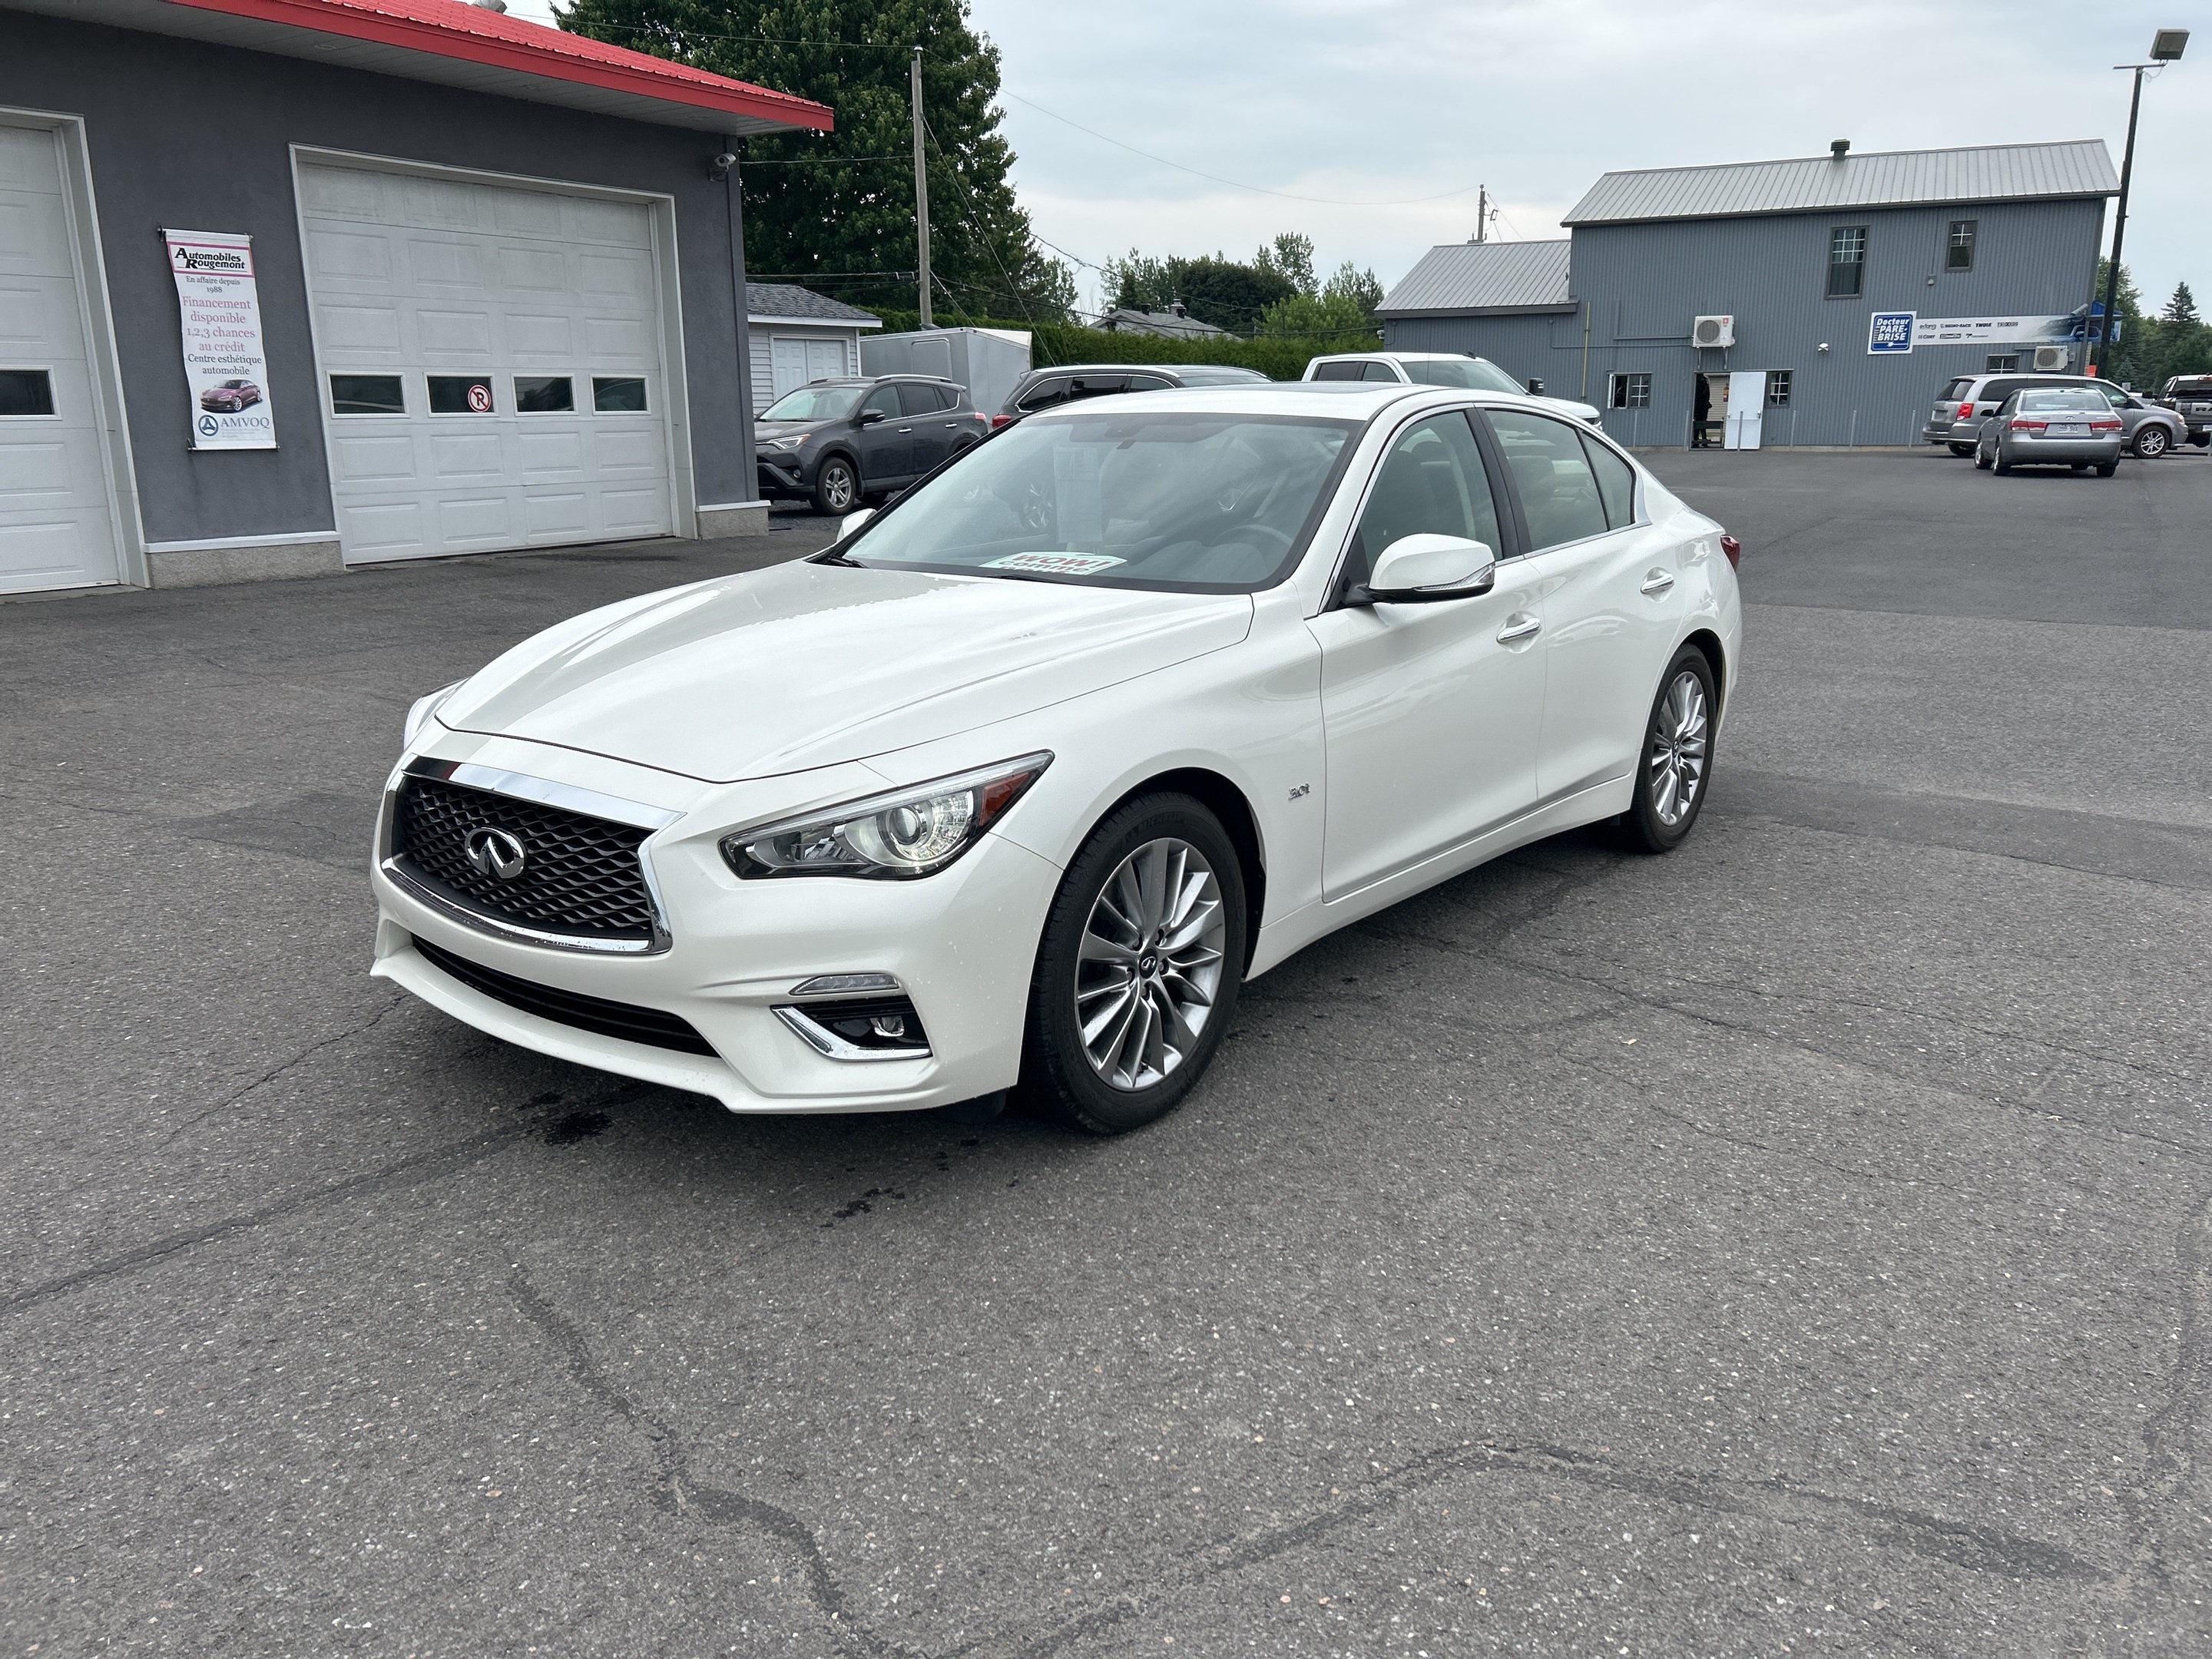 2018 Infiniti Q50 3.0t LUXE  AWD  CUIR  NAVIGATION  TOIT OUVRANT